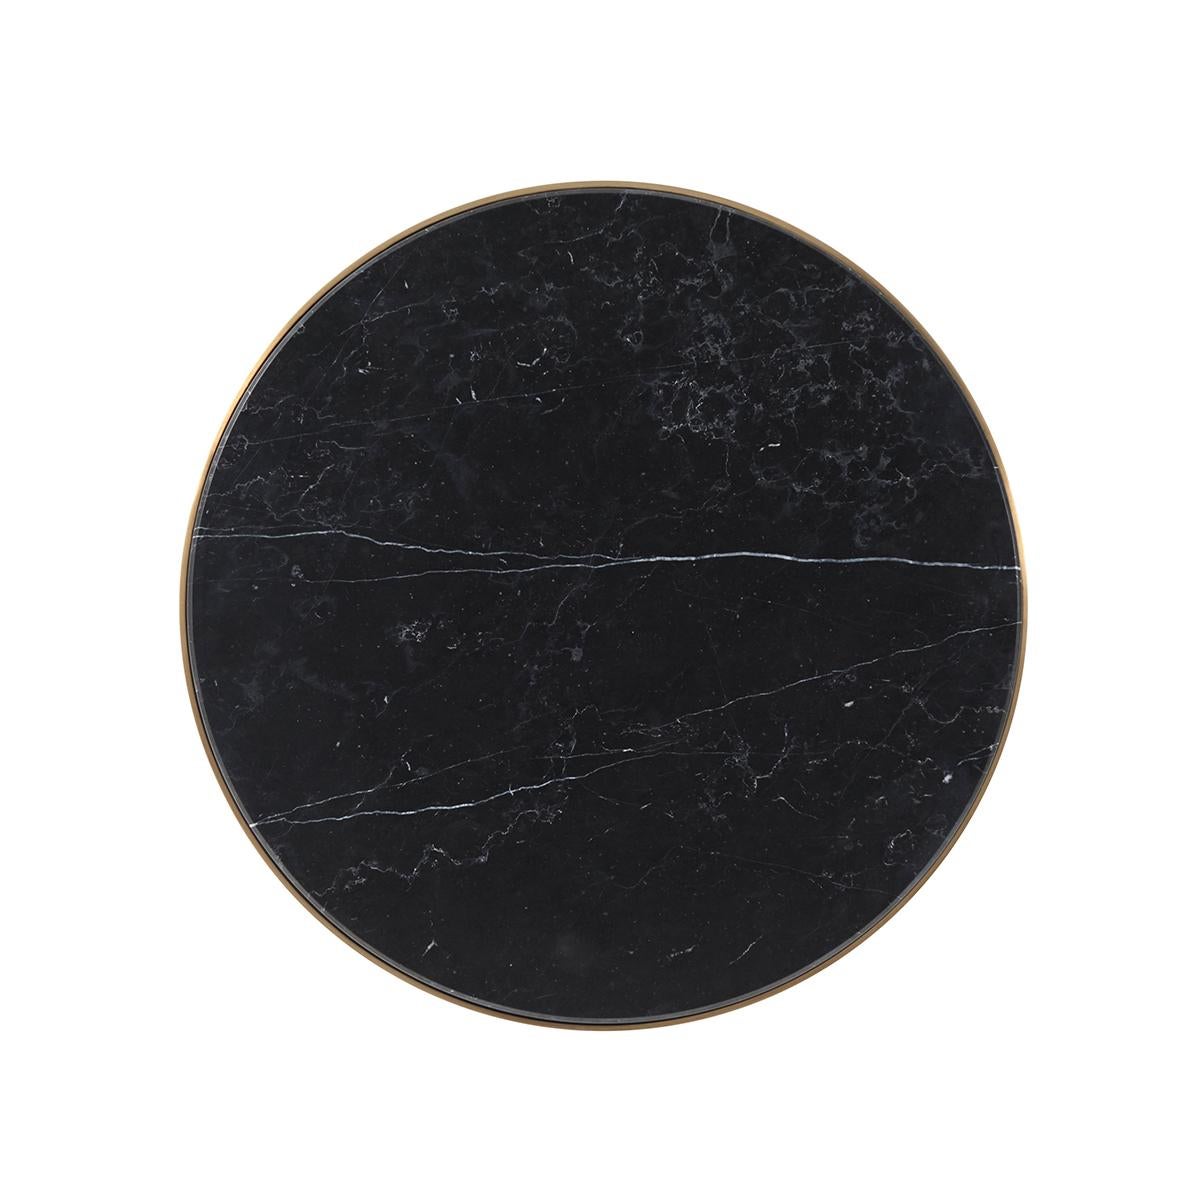 With a round black marble top on a brushed brass finish metal base with tapering legs.

Dimensions: 19.75